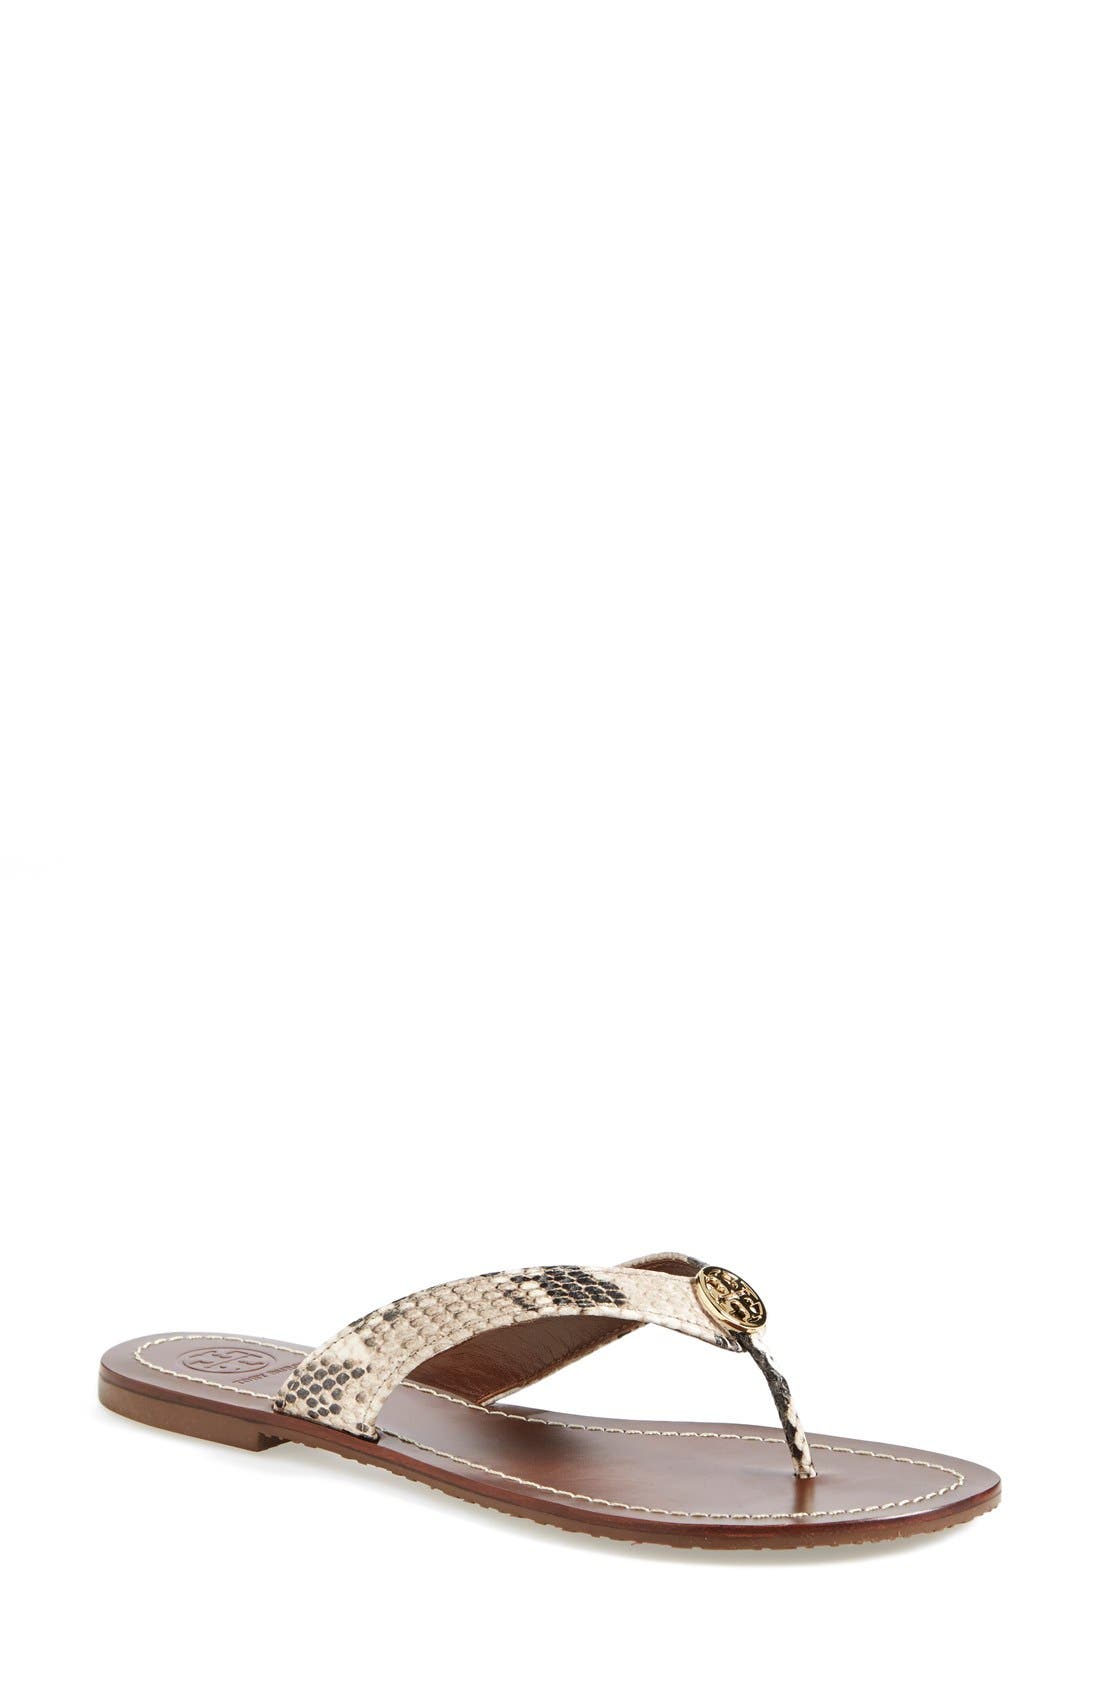 Tory Burch 'Thora' Leather Thong Sandal 